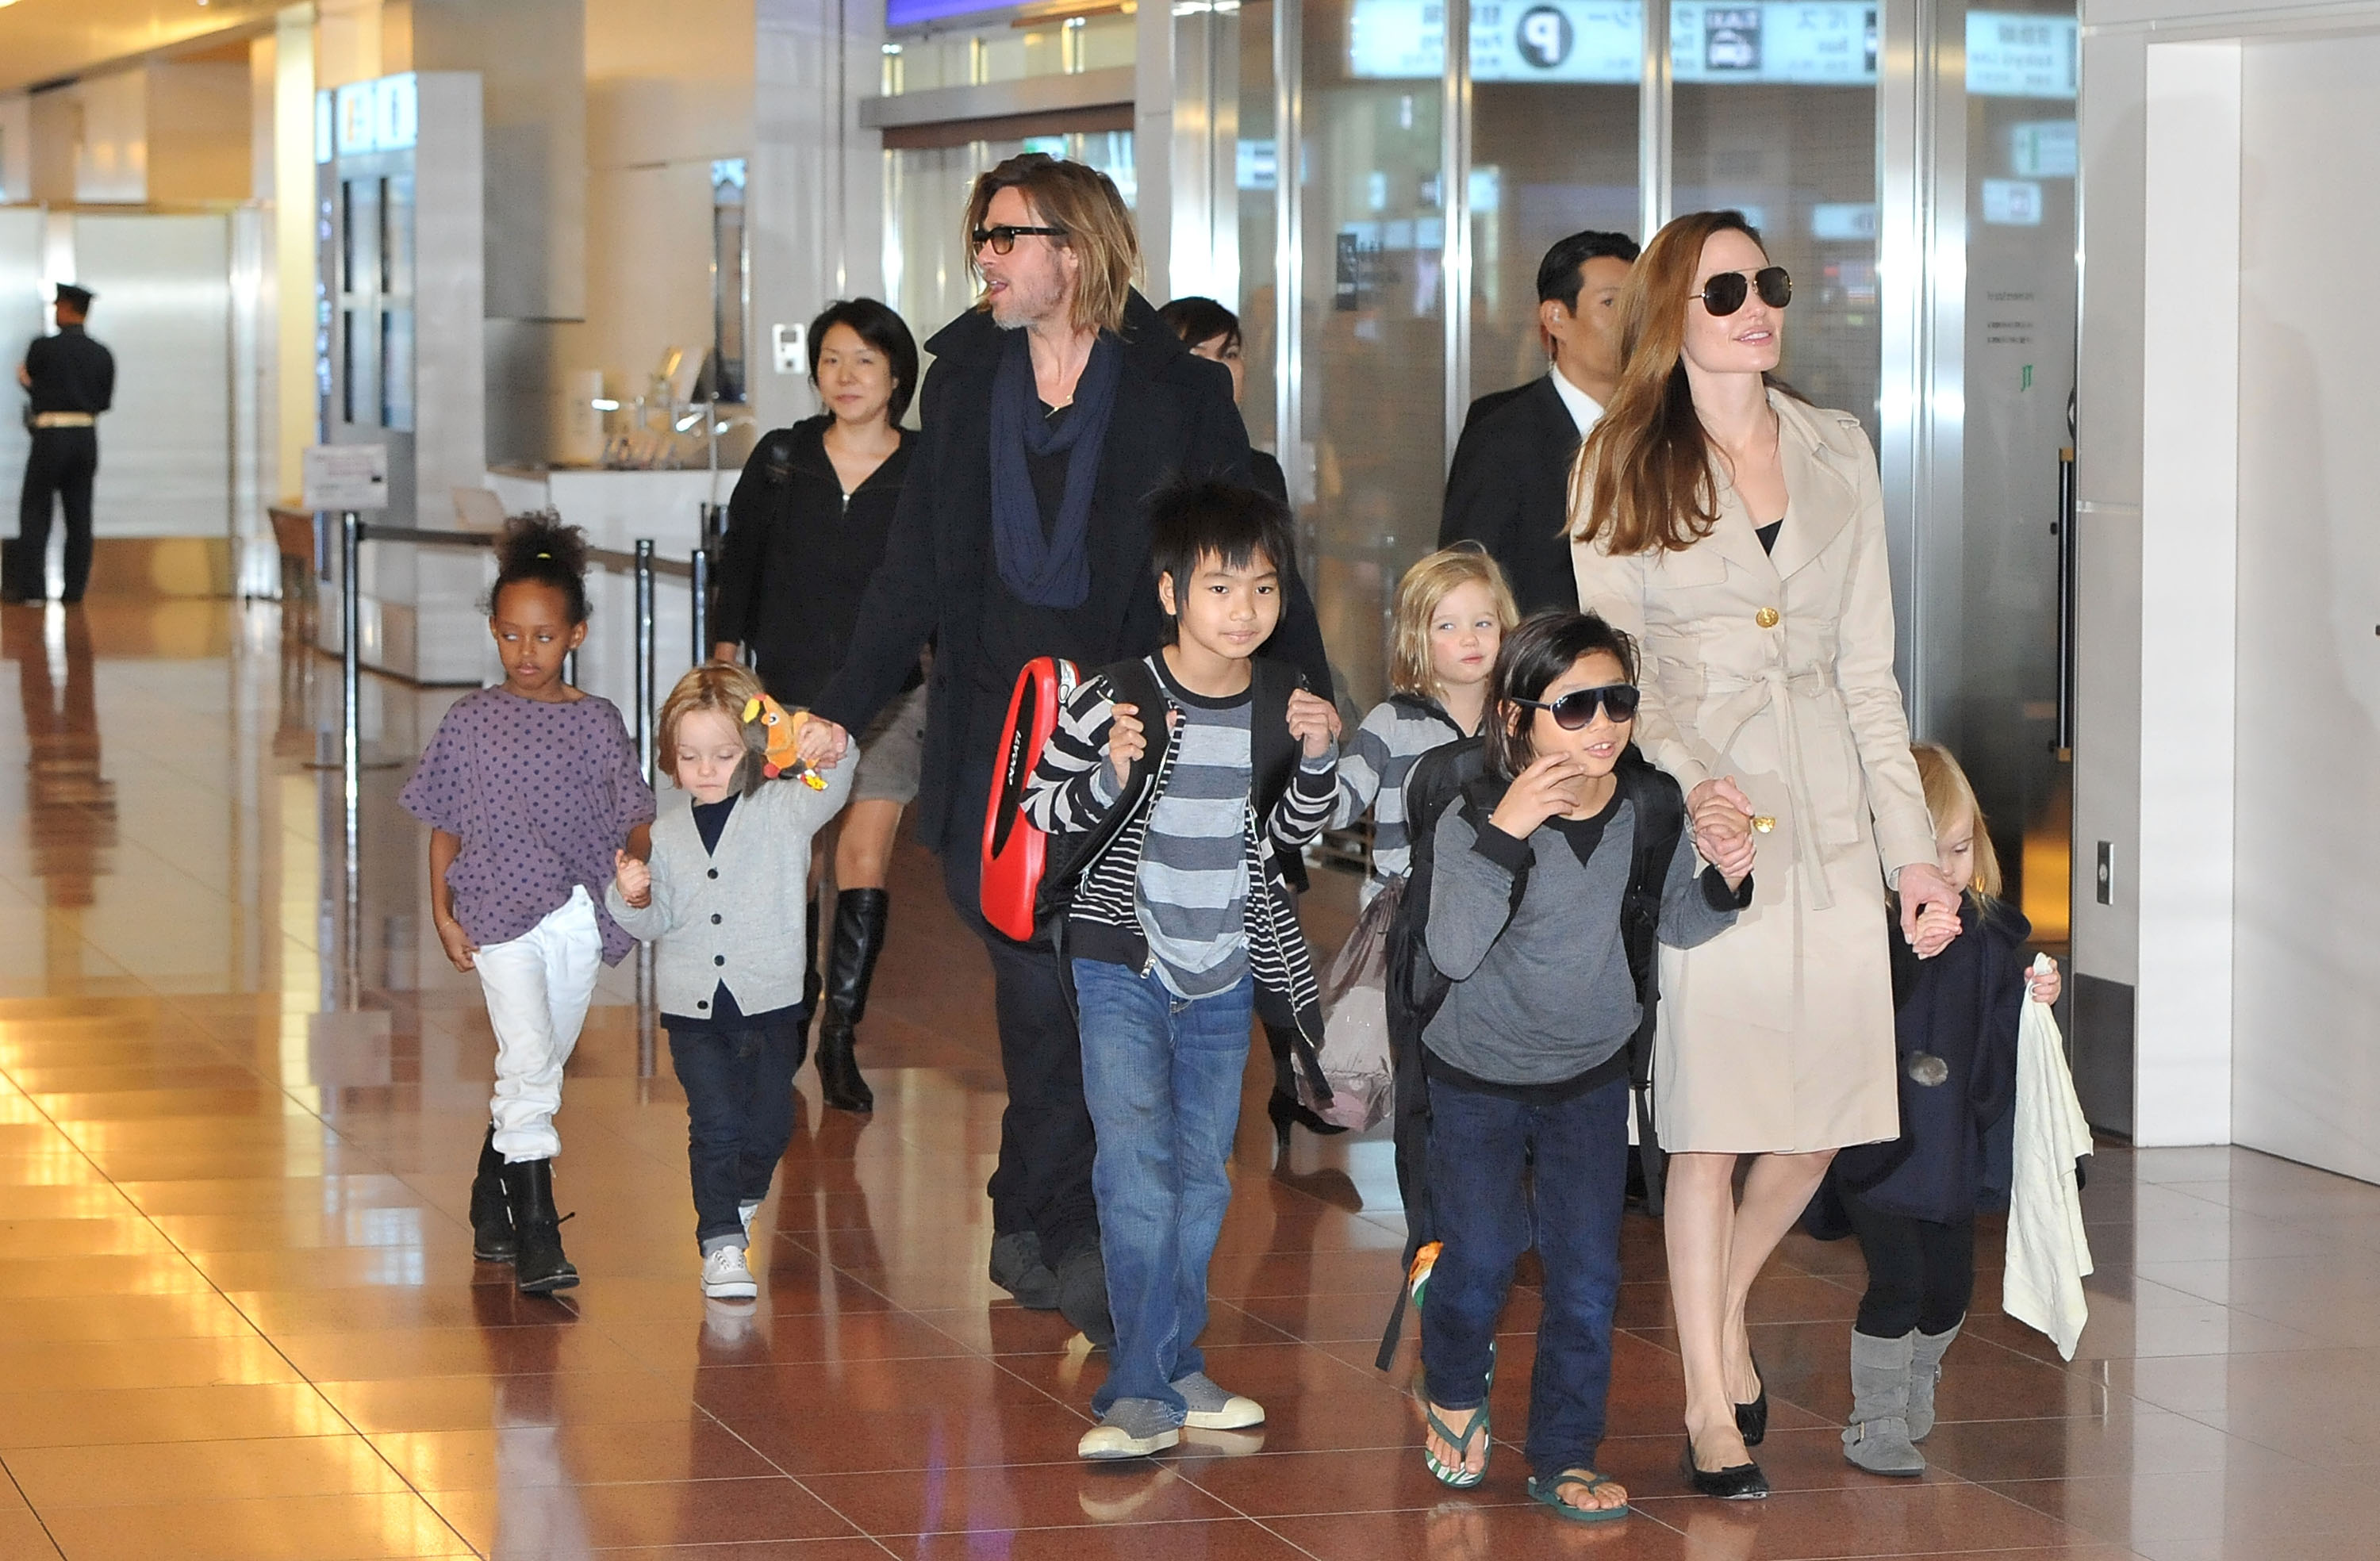 Brad Pitt, Angelina Jolie, and their children Maddox, Pax, Zahara, Shiloh, Knox, and Vivienne arrive at Haneda International Airport on November 8 in Tokyo, Japan | Source: Getty Images